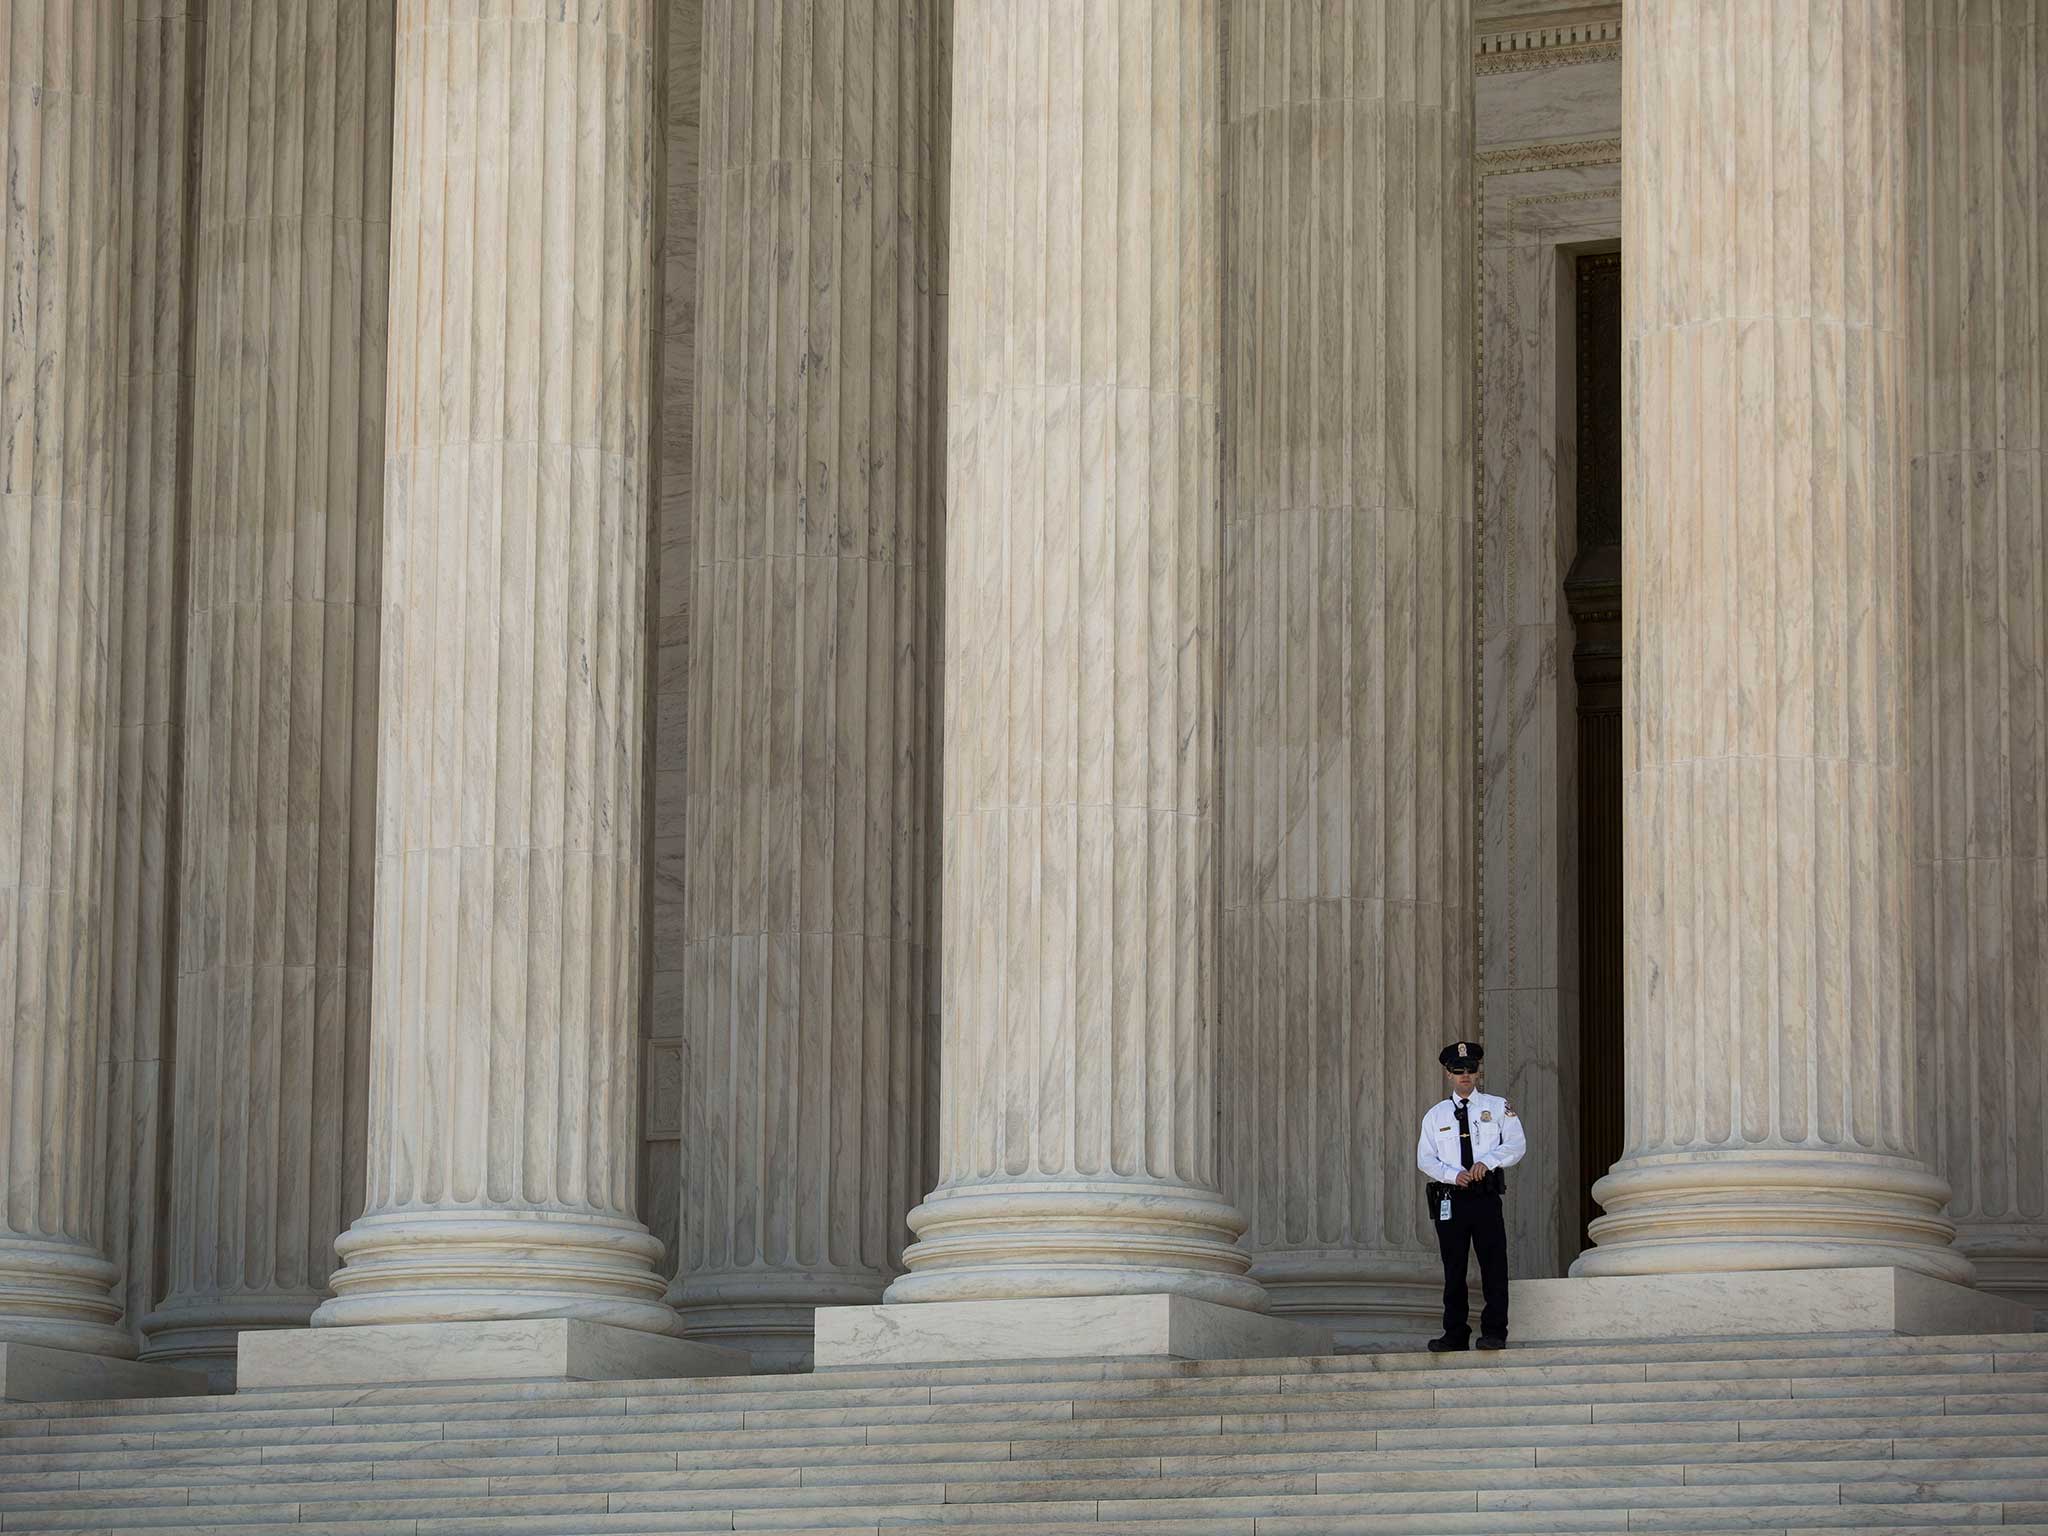 A US policeman outside the Supreme Court